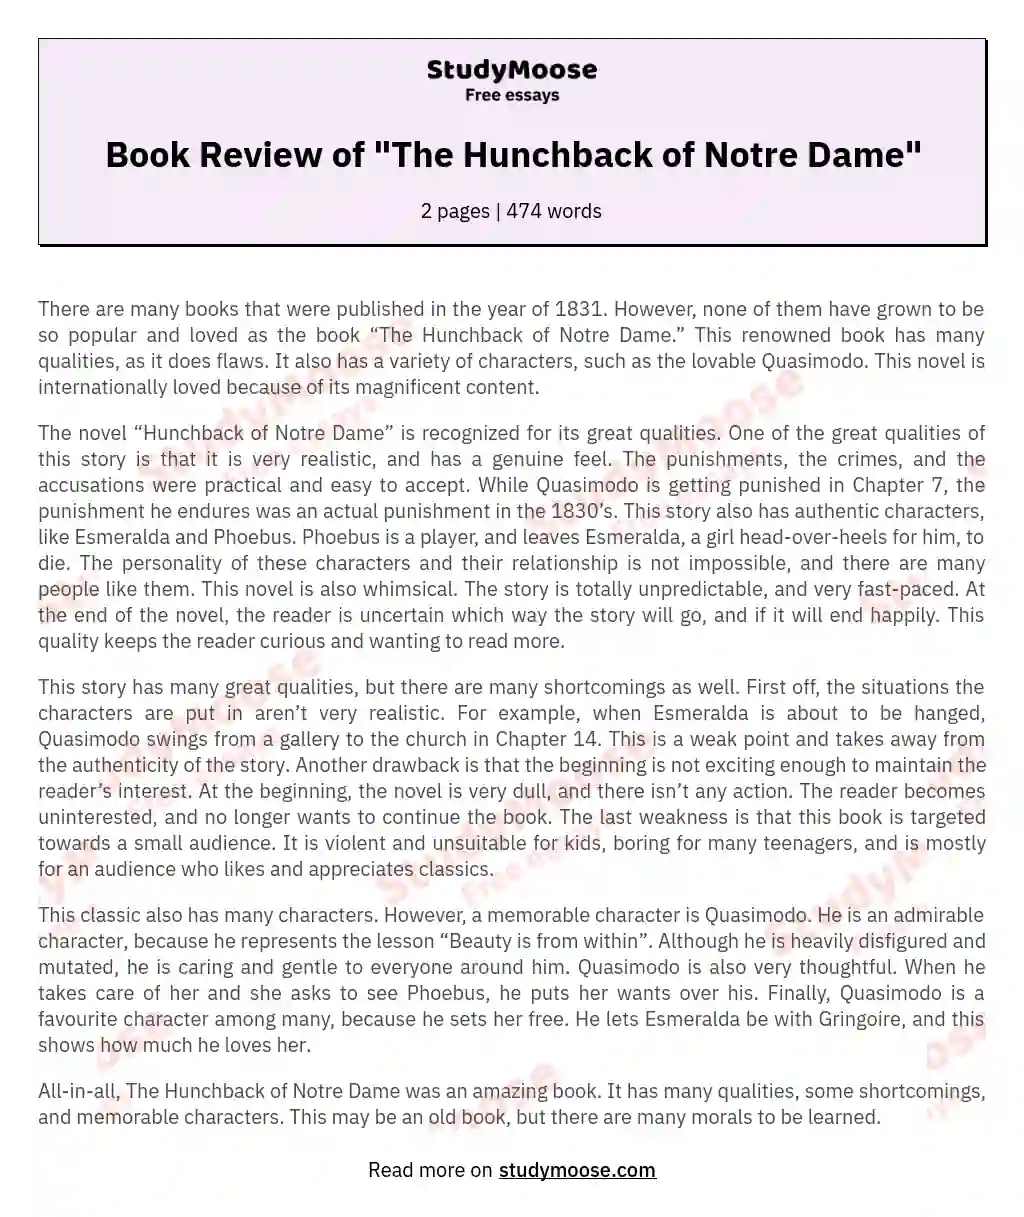 Book Review of &quot;The Hunchback of Notre Dame" essay